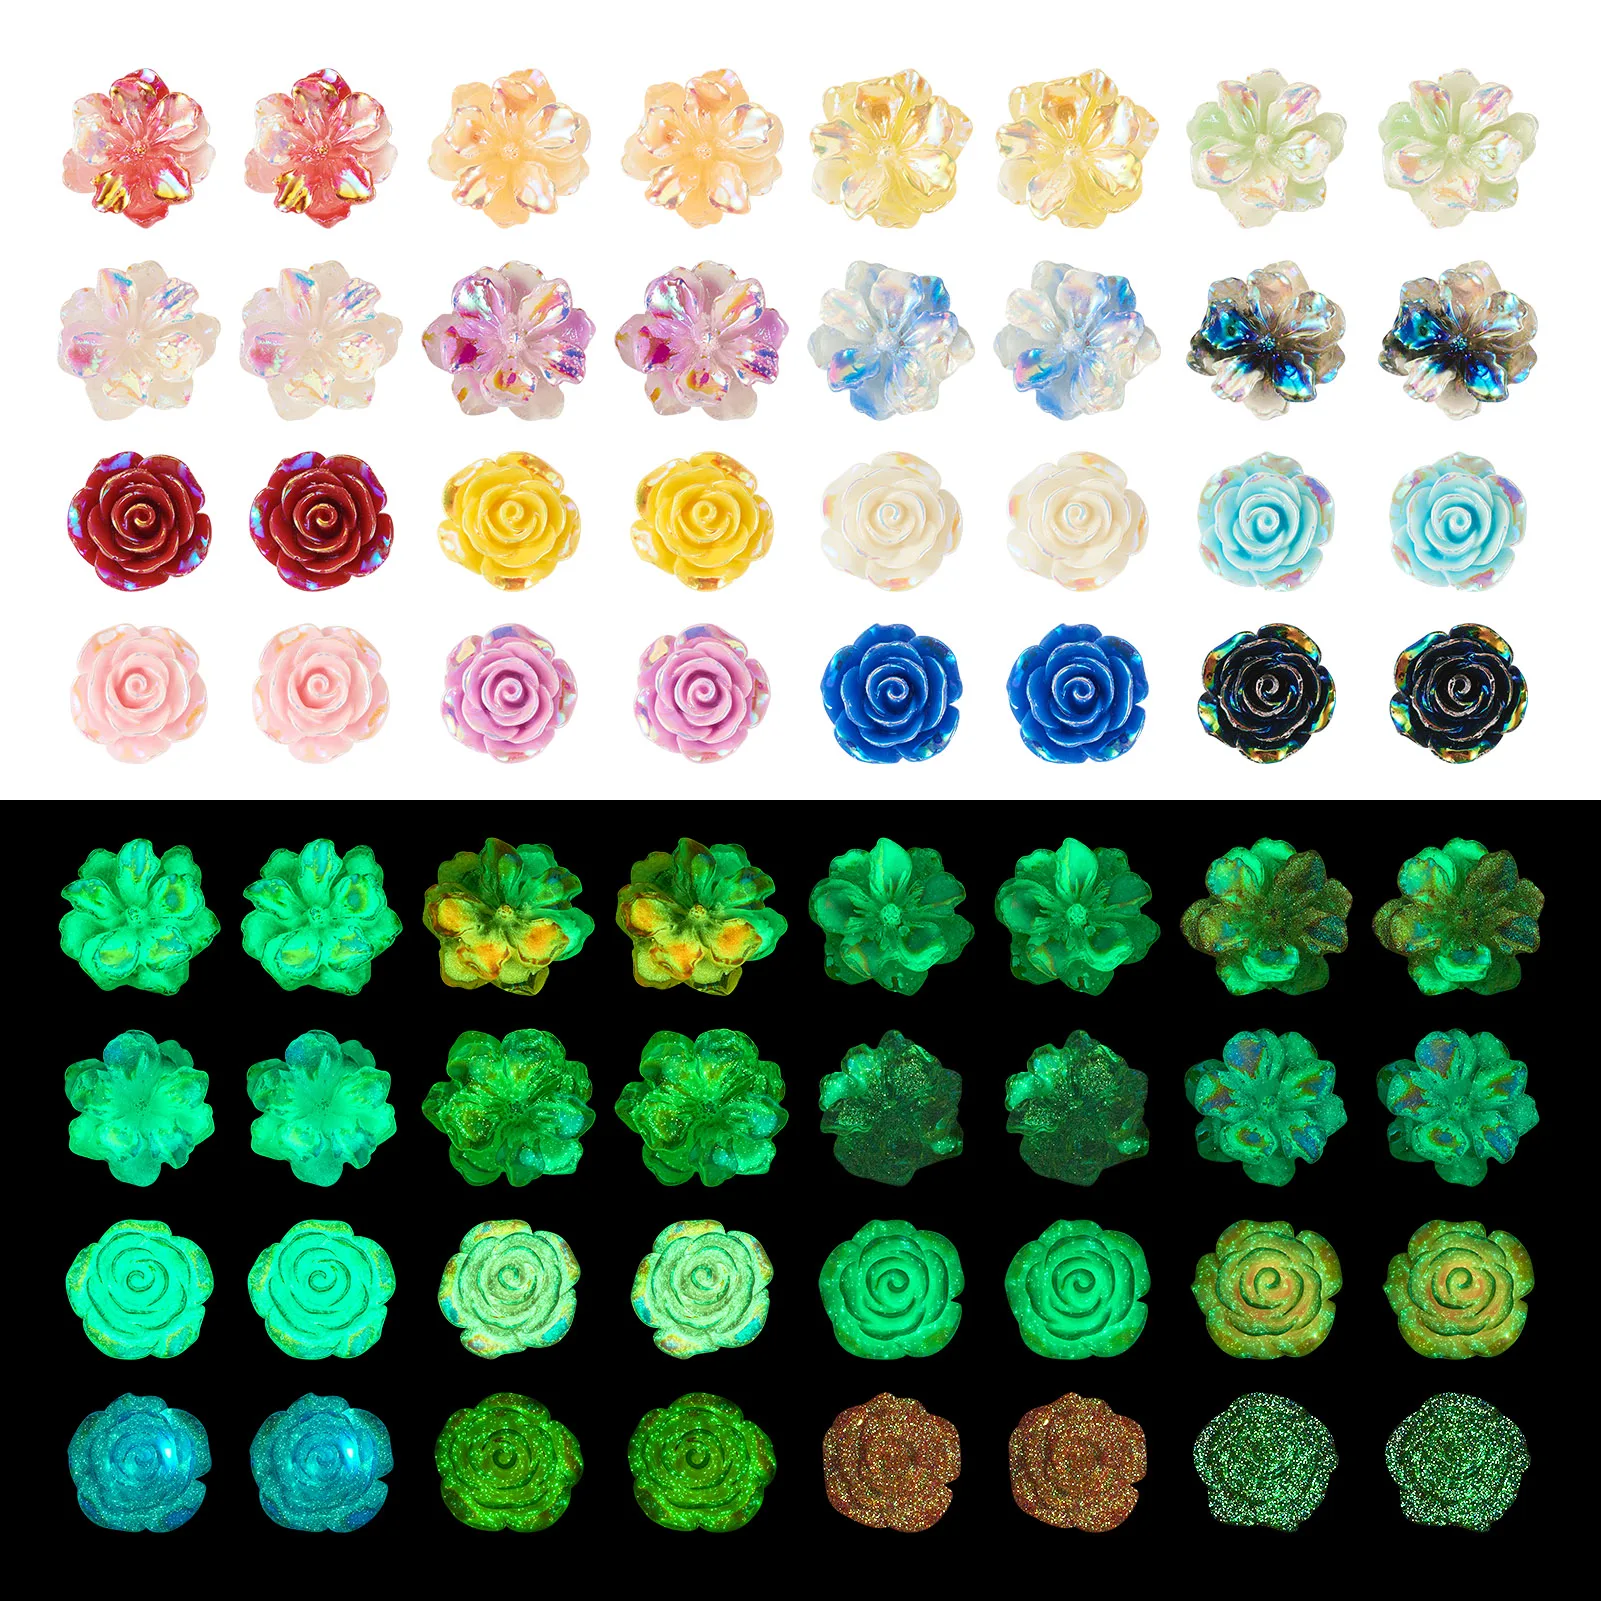 

48Pcs Mixed Styles Flower Luminous Opaque Resin Cabochons Glow in the Dark Flat Back Cabochon DIY Jewelry Decorative Accessories